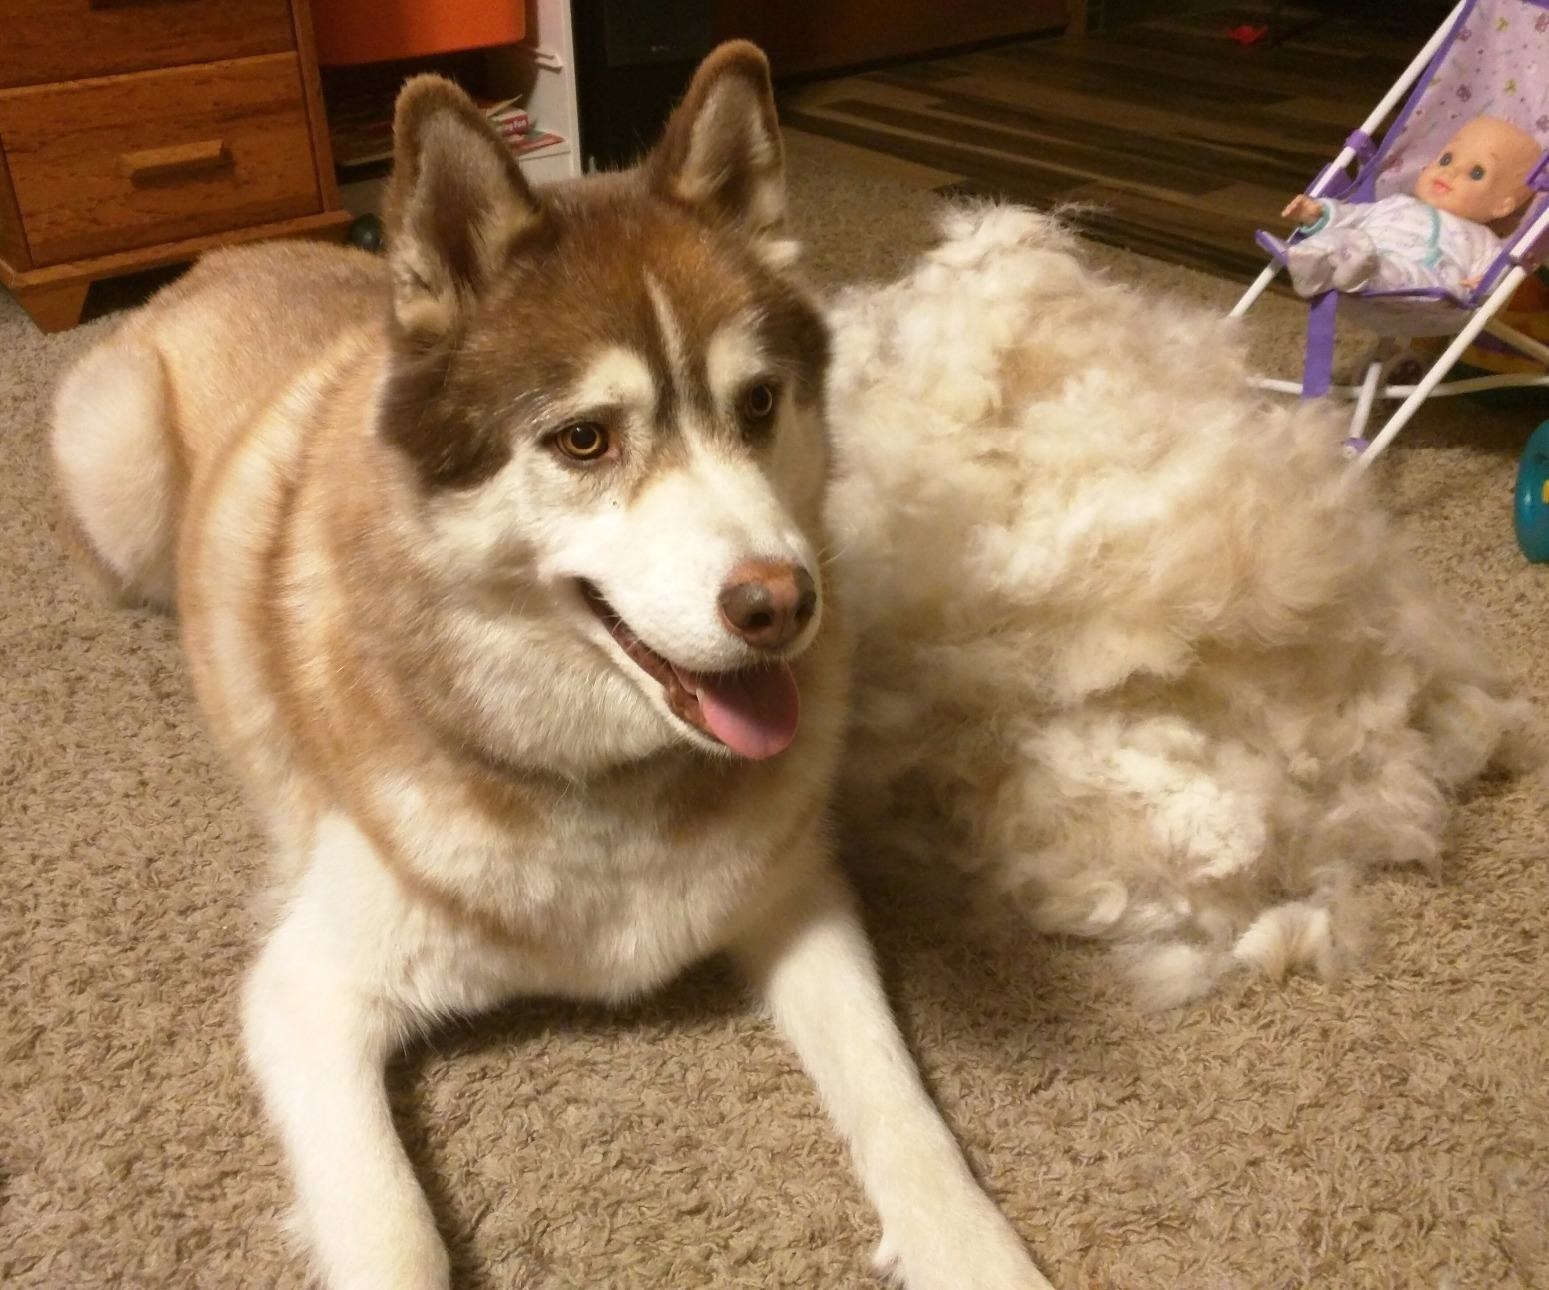 husky poses with mountain of fur almost as tall as the dog lying down